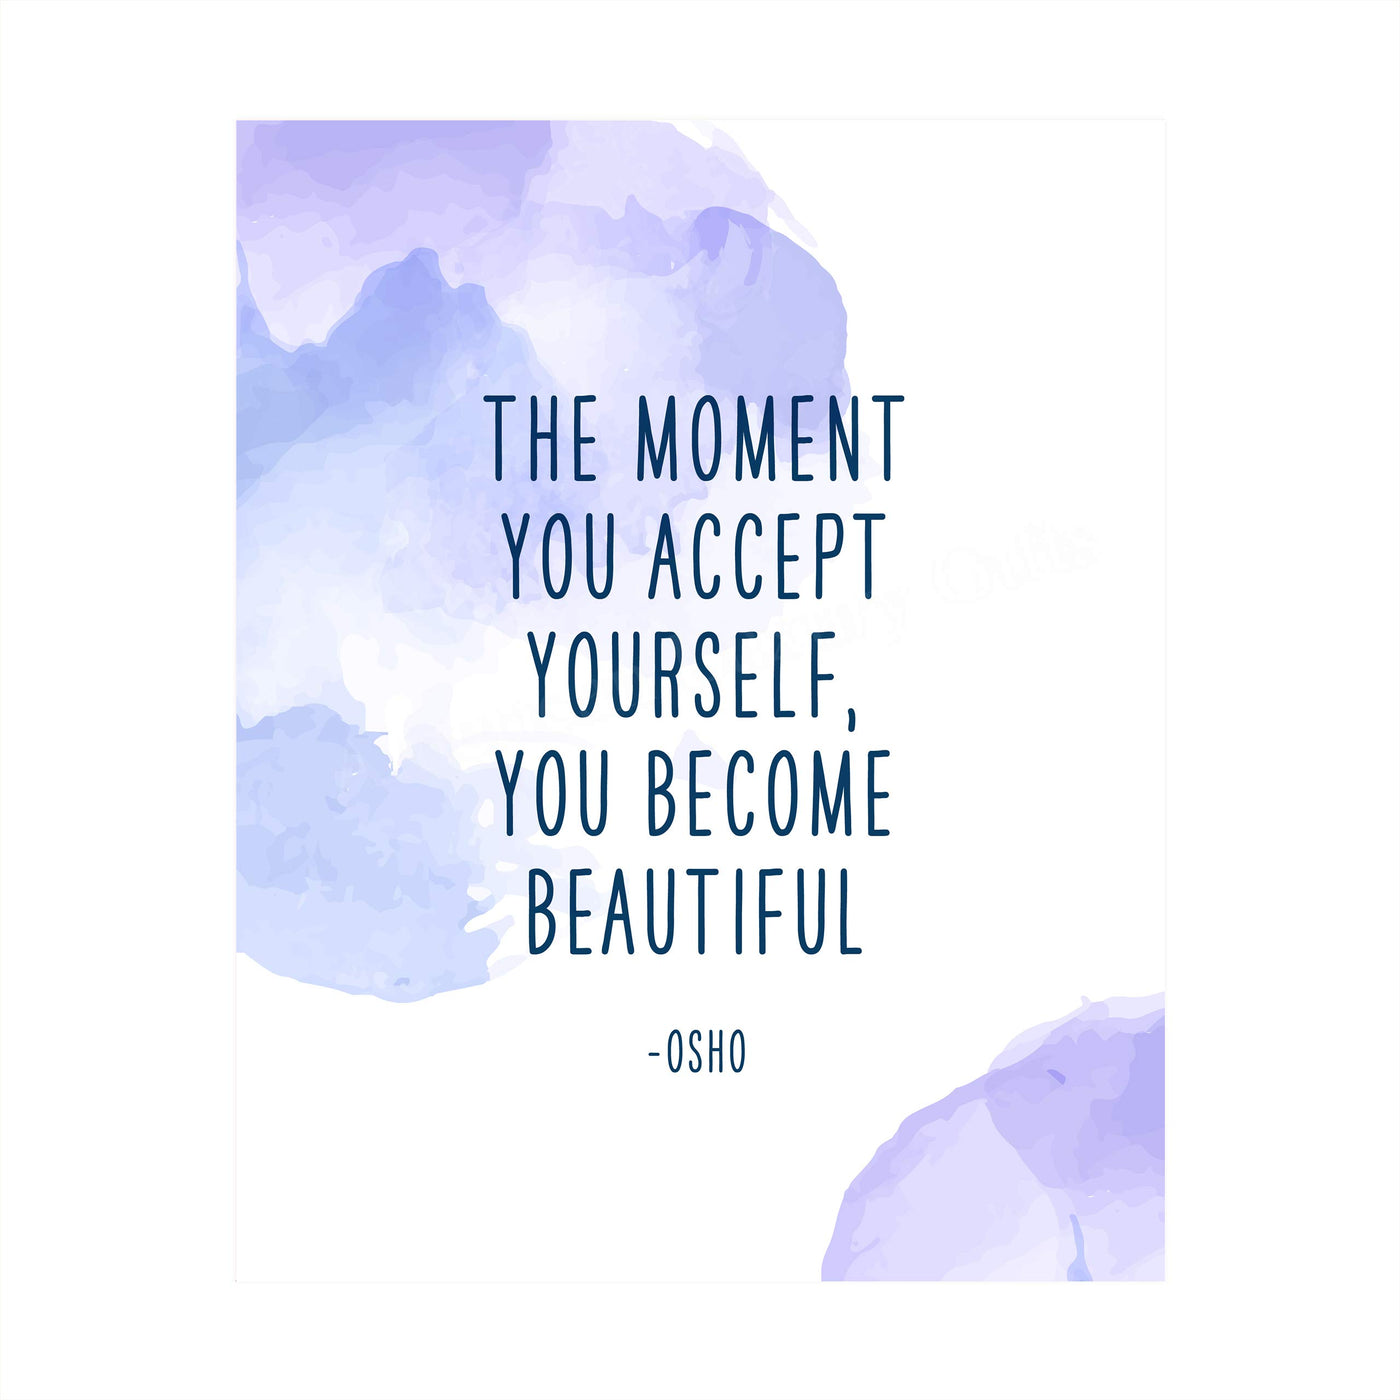 Osho-"The Moment You Accept Yourself-Become Beautiful" Inspirational Quotes Wall Art -8x10" Abstract Spiritual Poster Print-Ready to Frame. Positive Home-Office-Desk-School Decor. Great Zen Gift!